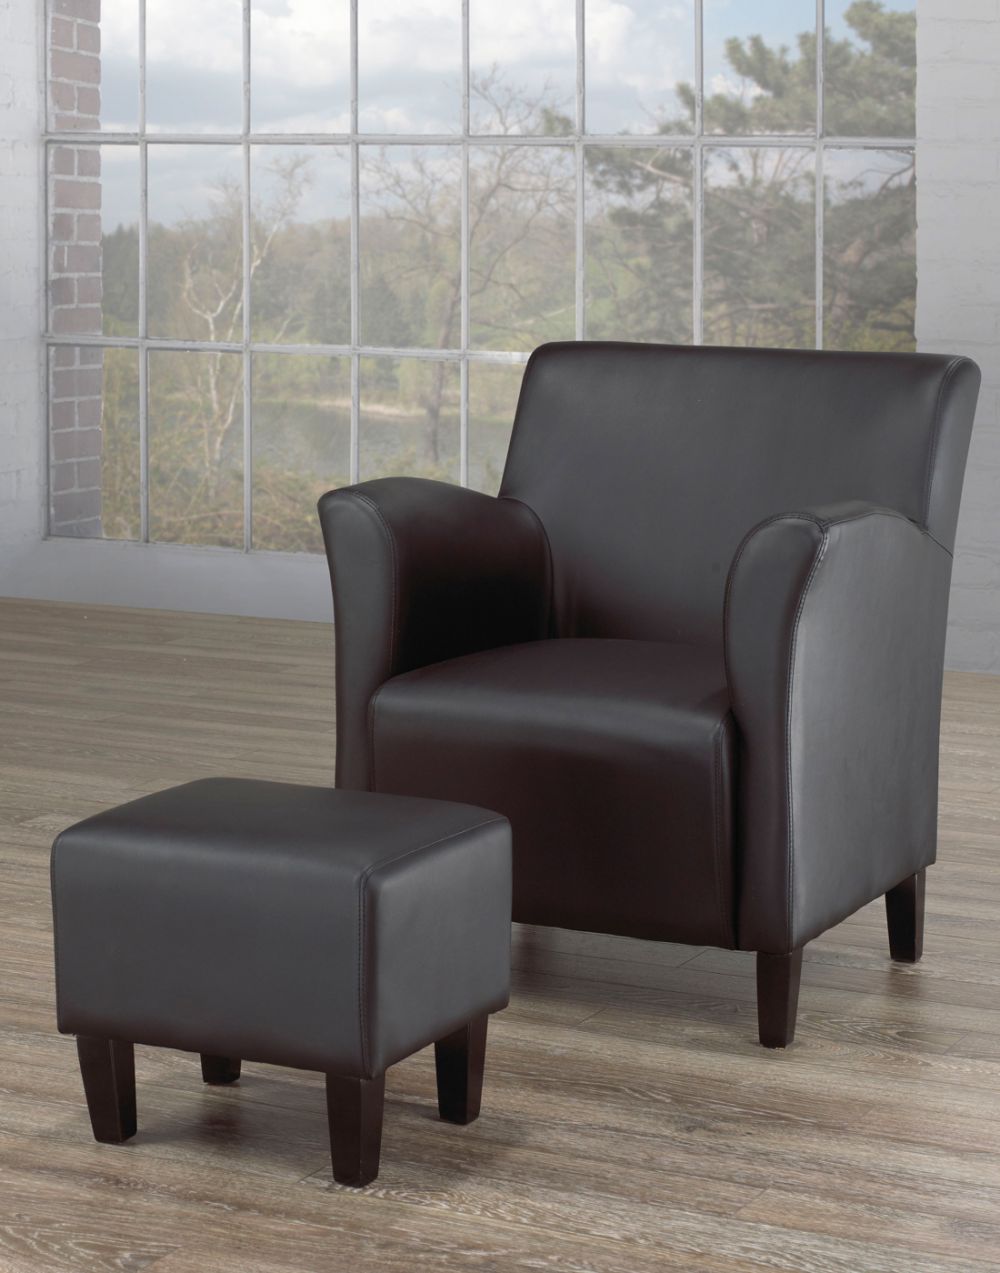 IF-662B -Tub Chair With Matching Ottoman